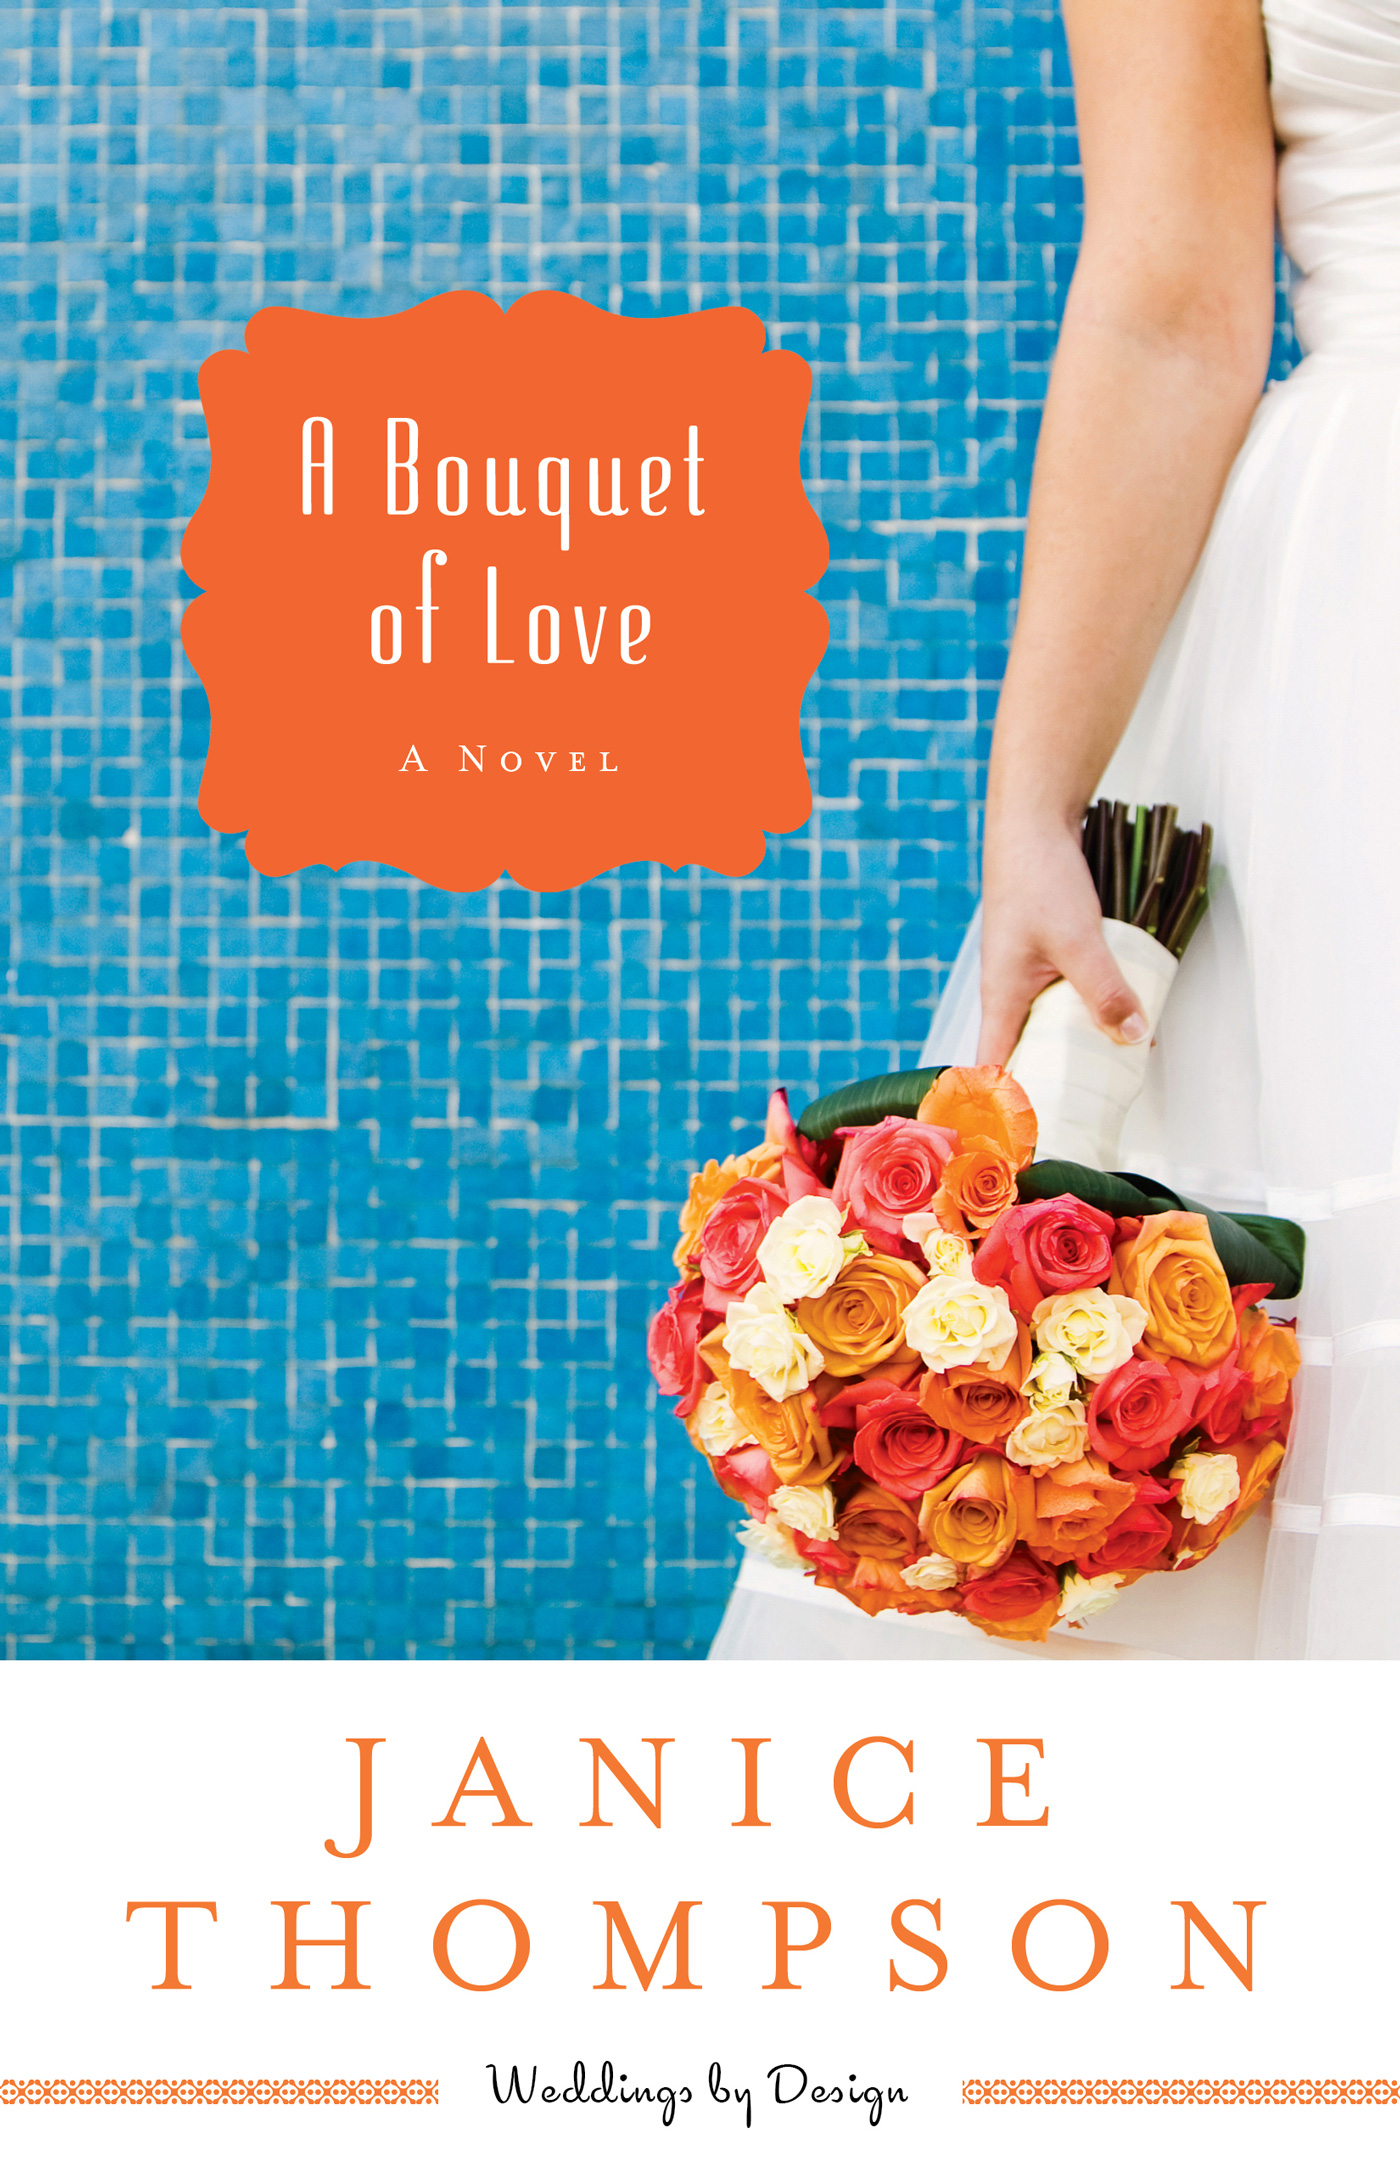 A Bouquet of Love (2014) by Janice  Thompson